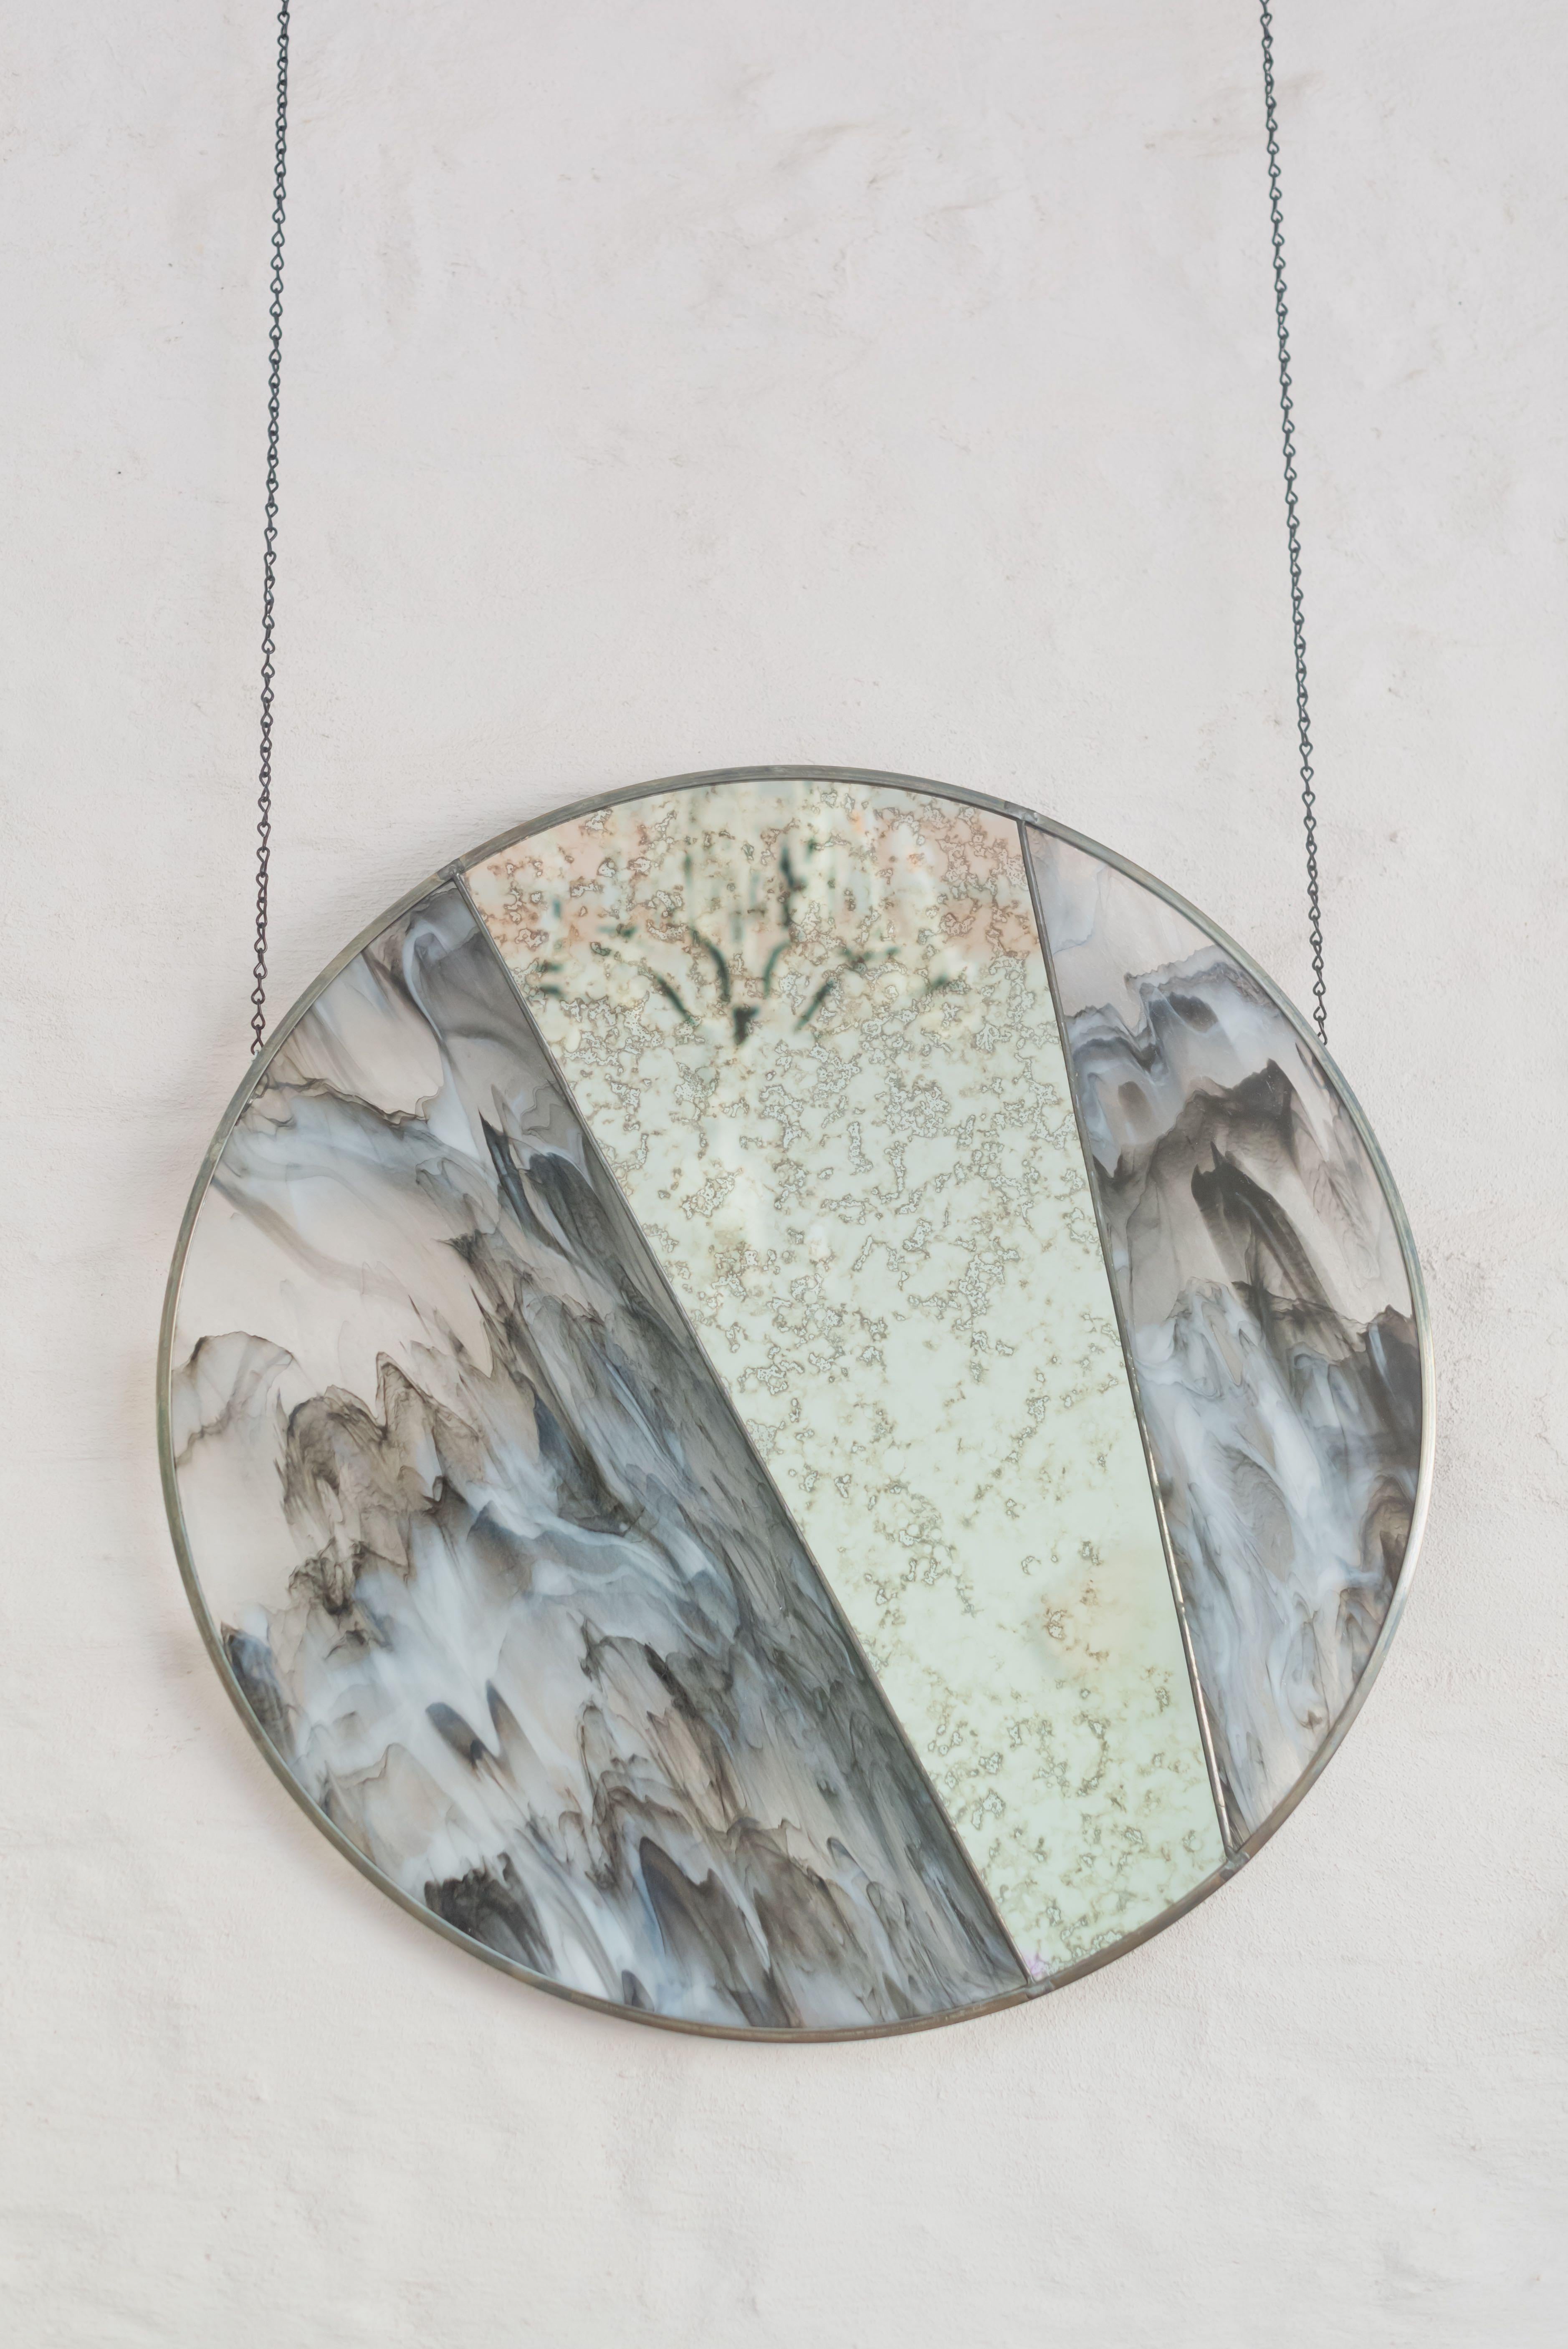 This striking mirror is both dramatic and whimsical. Using artisan stained glass techniques, each piece is created with its own sense of individuality. Stained glass offers nearly endless color and textural options giving you the ability to create